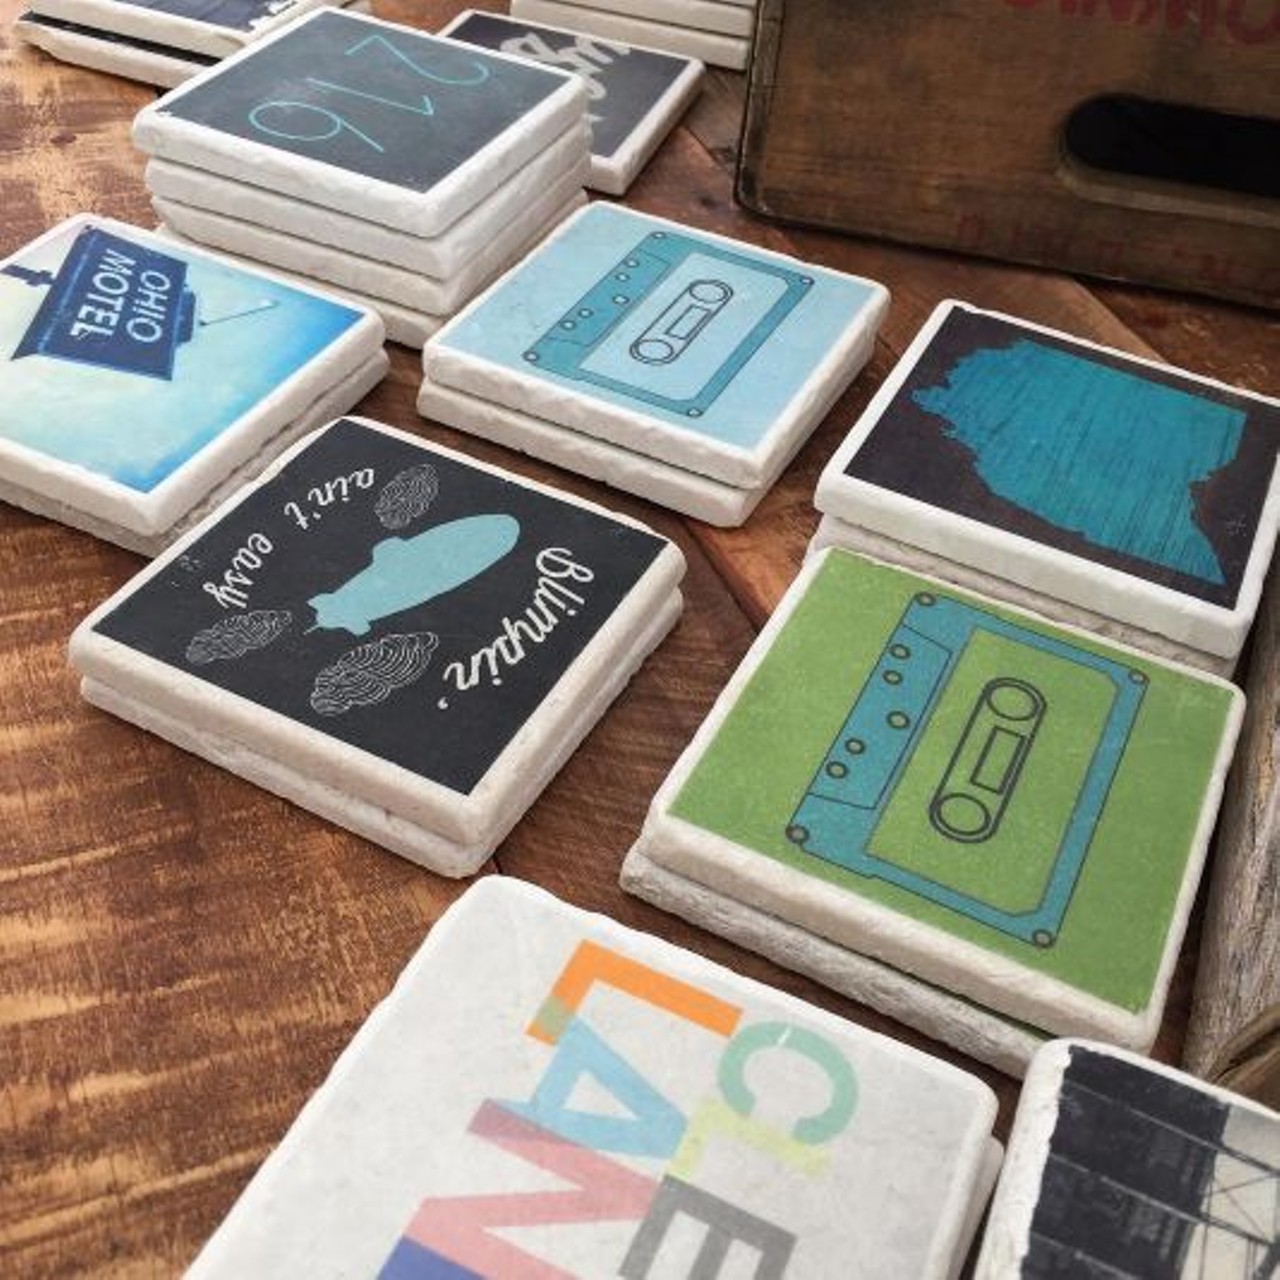  Studio KMR Photography
This studio doesn't just offer photography; artist Kevin Richards also makes coasters, magnets and wood prints, so you can adorn your home with retro Cleveland-oriented designs.
Photo via studiokmrphotography /Instagram